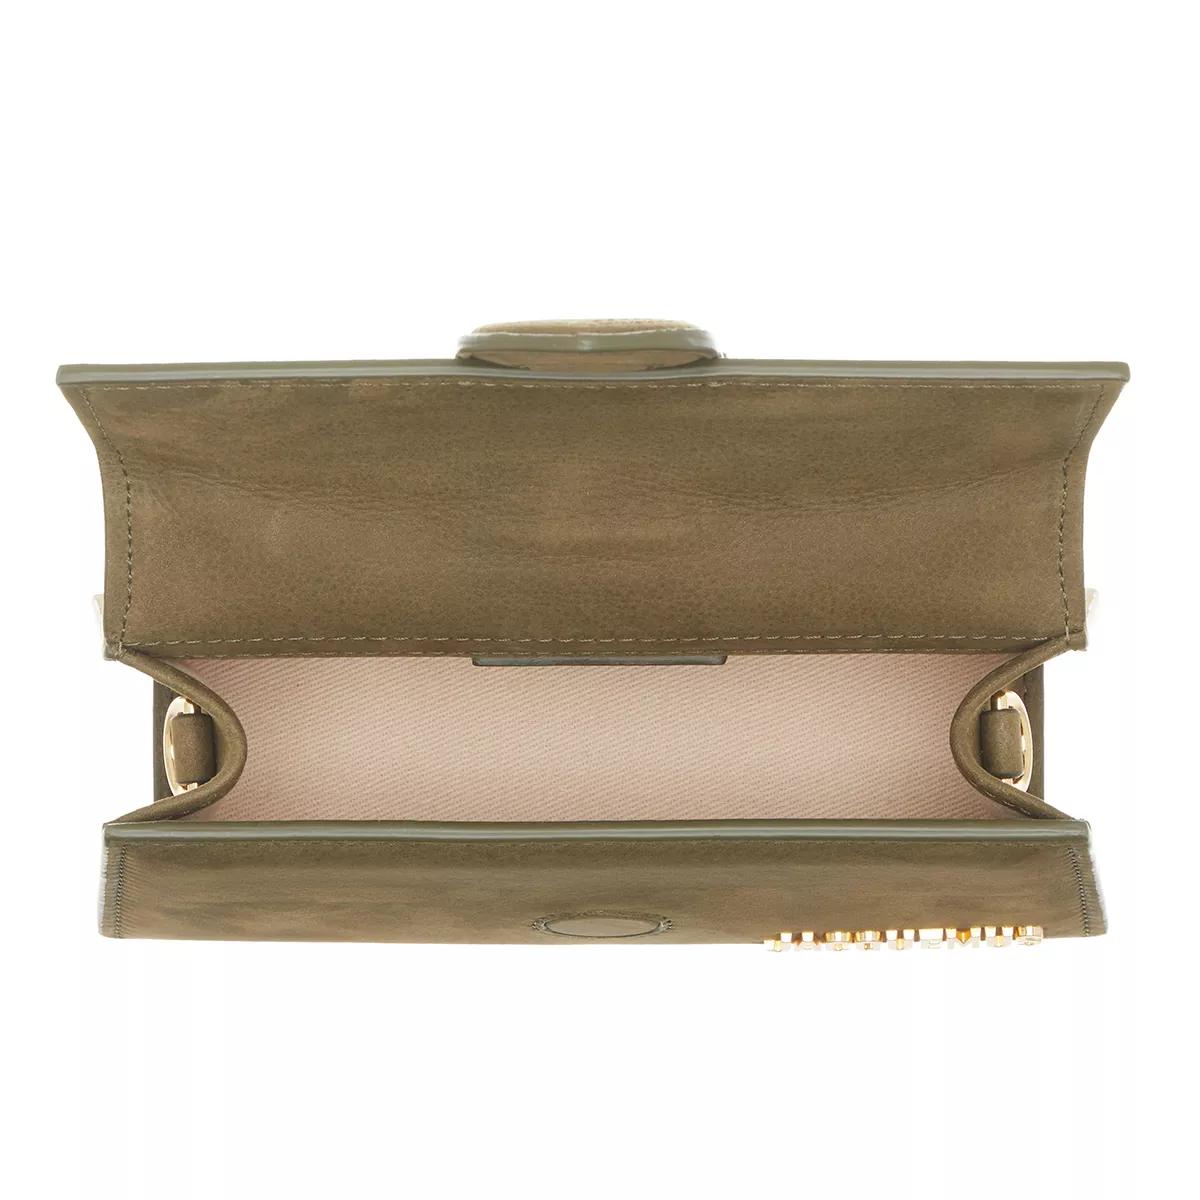 Le Bambino bag in Green Leather